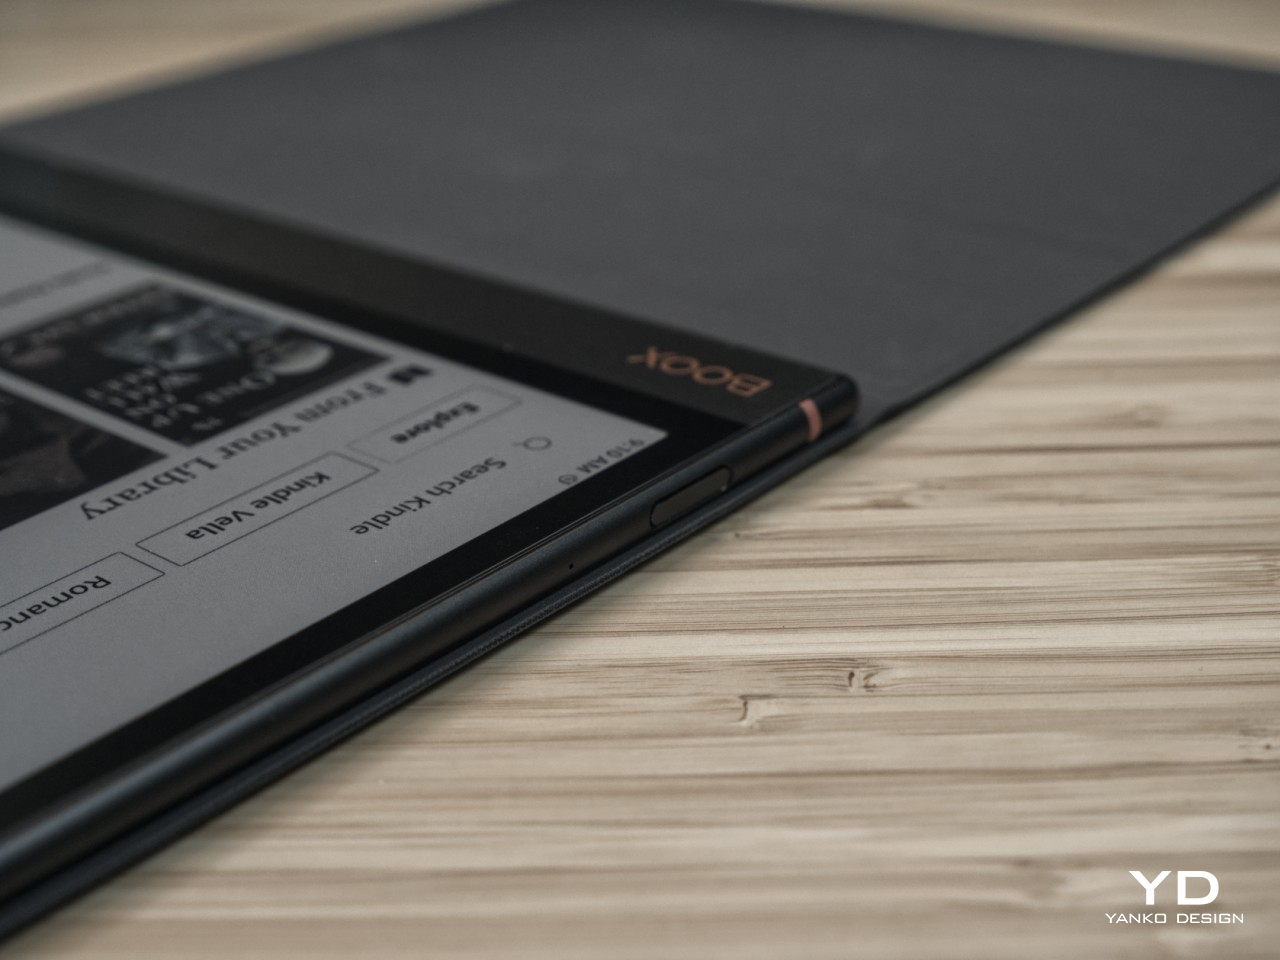 Onyx Boox Nova3 Color Review: an Android E-Reader With a Splash of Color